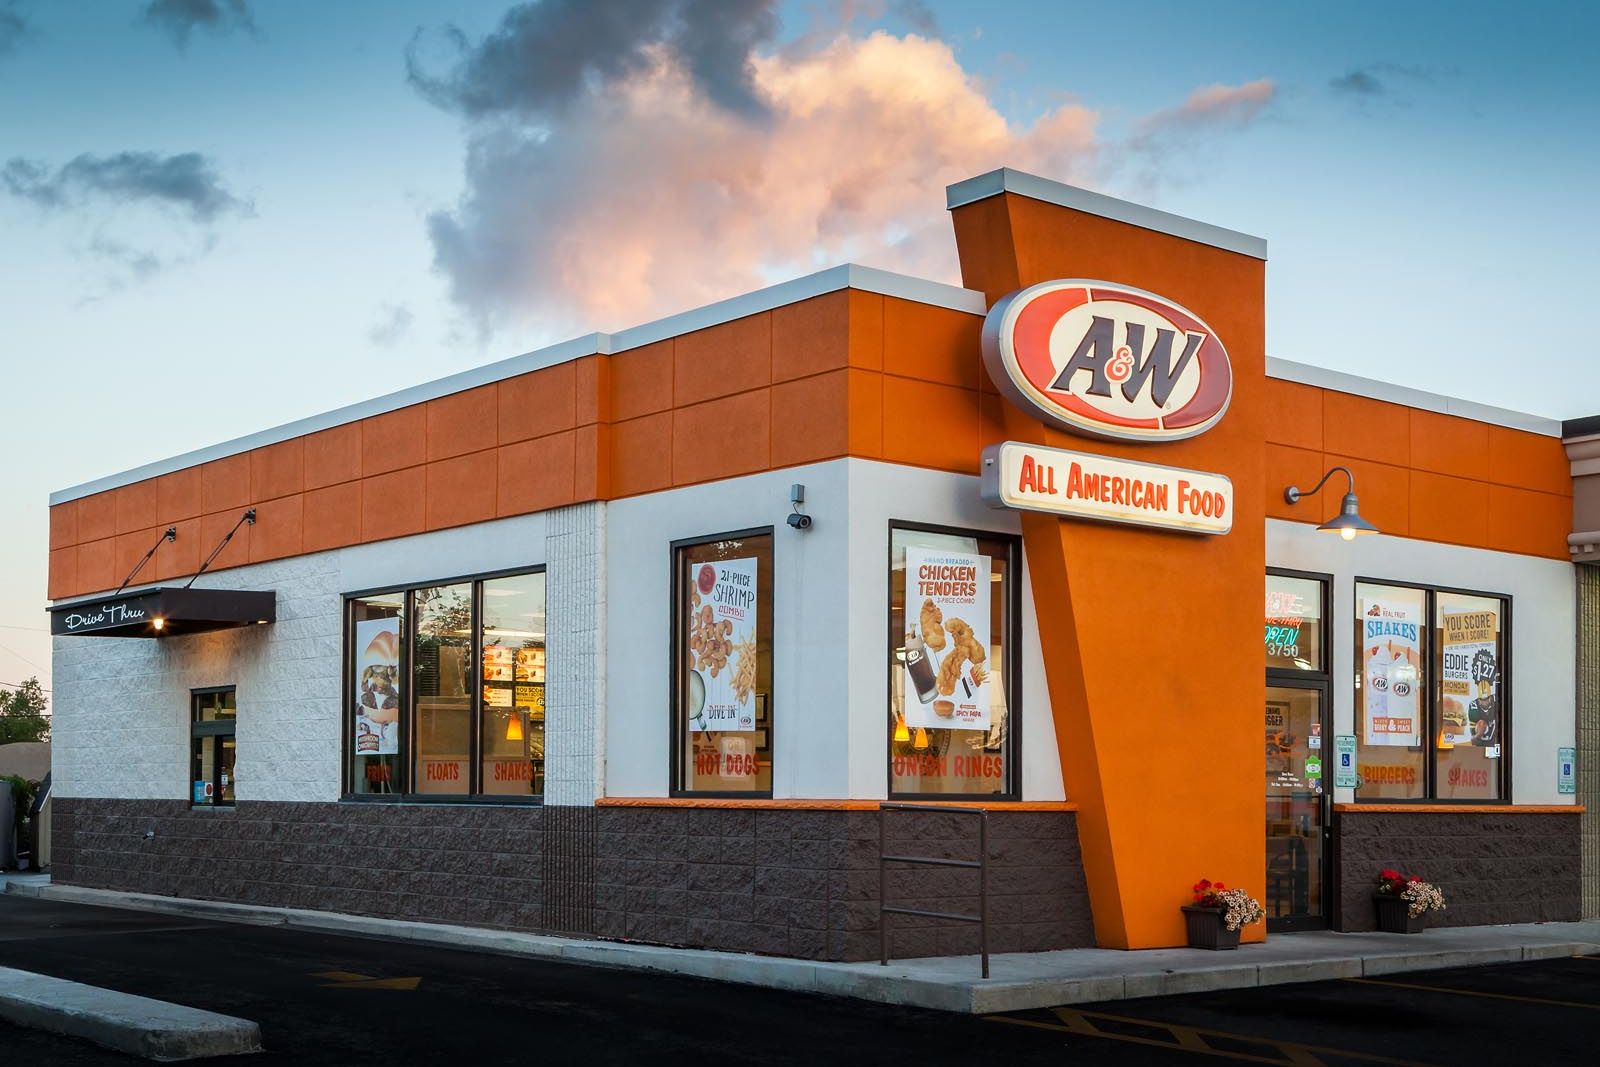 Charlotte Residents Who Invested in Multi-Unit, Multi-Brand Franchises During the Pandemic are Bringing A&W Restaurants to the Rock Hill Area